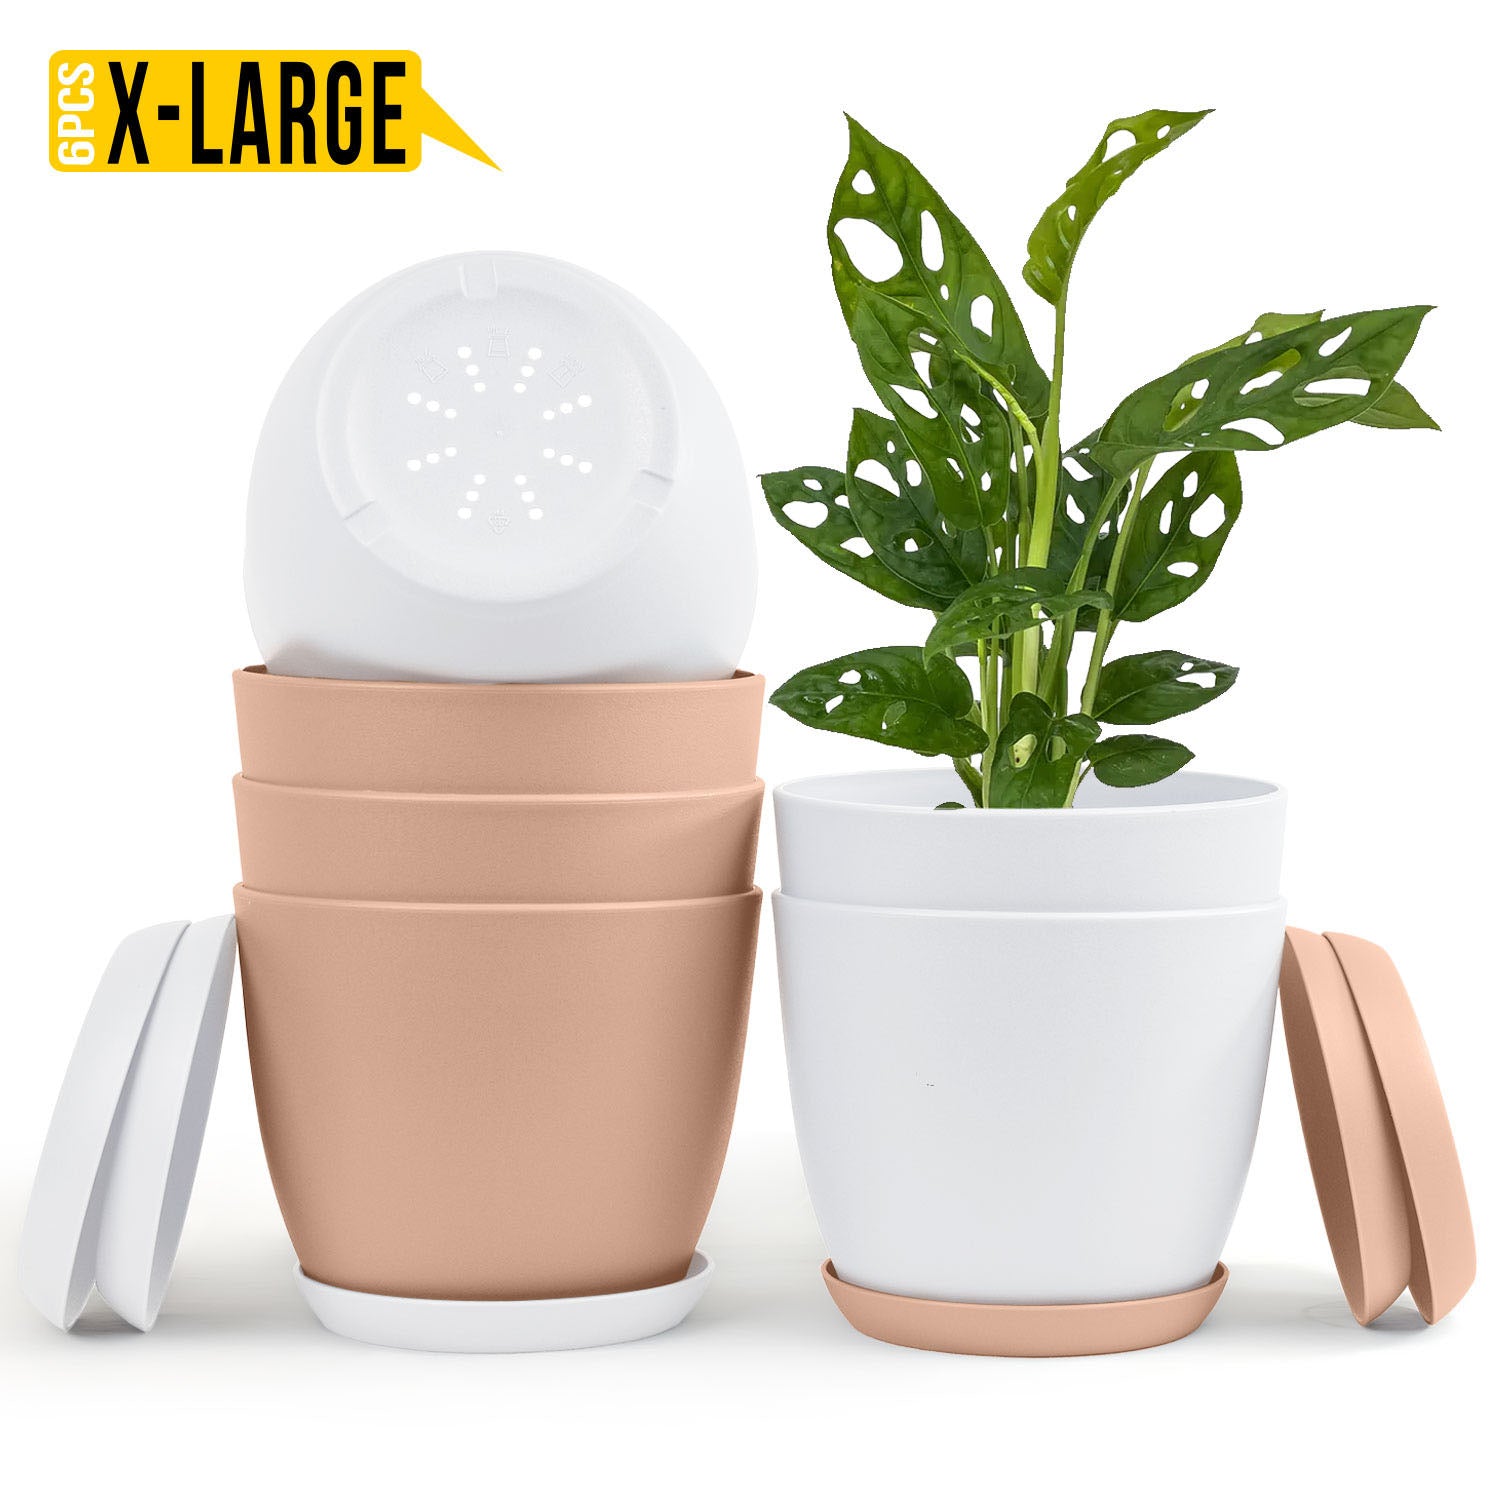 Fast Forward Extra Large Plant Pots with Drainage: Stylish Home Decor Flower Pots in Two Vibrant Colors - Ideal for Indoor Planters, Multi-Packs for Plastic Planters, Cactus, and Succulents Fast Forward